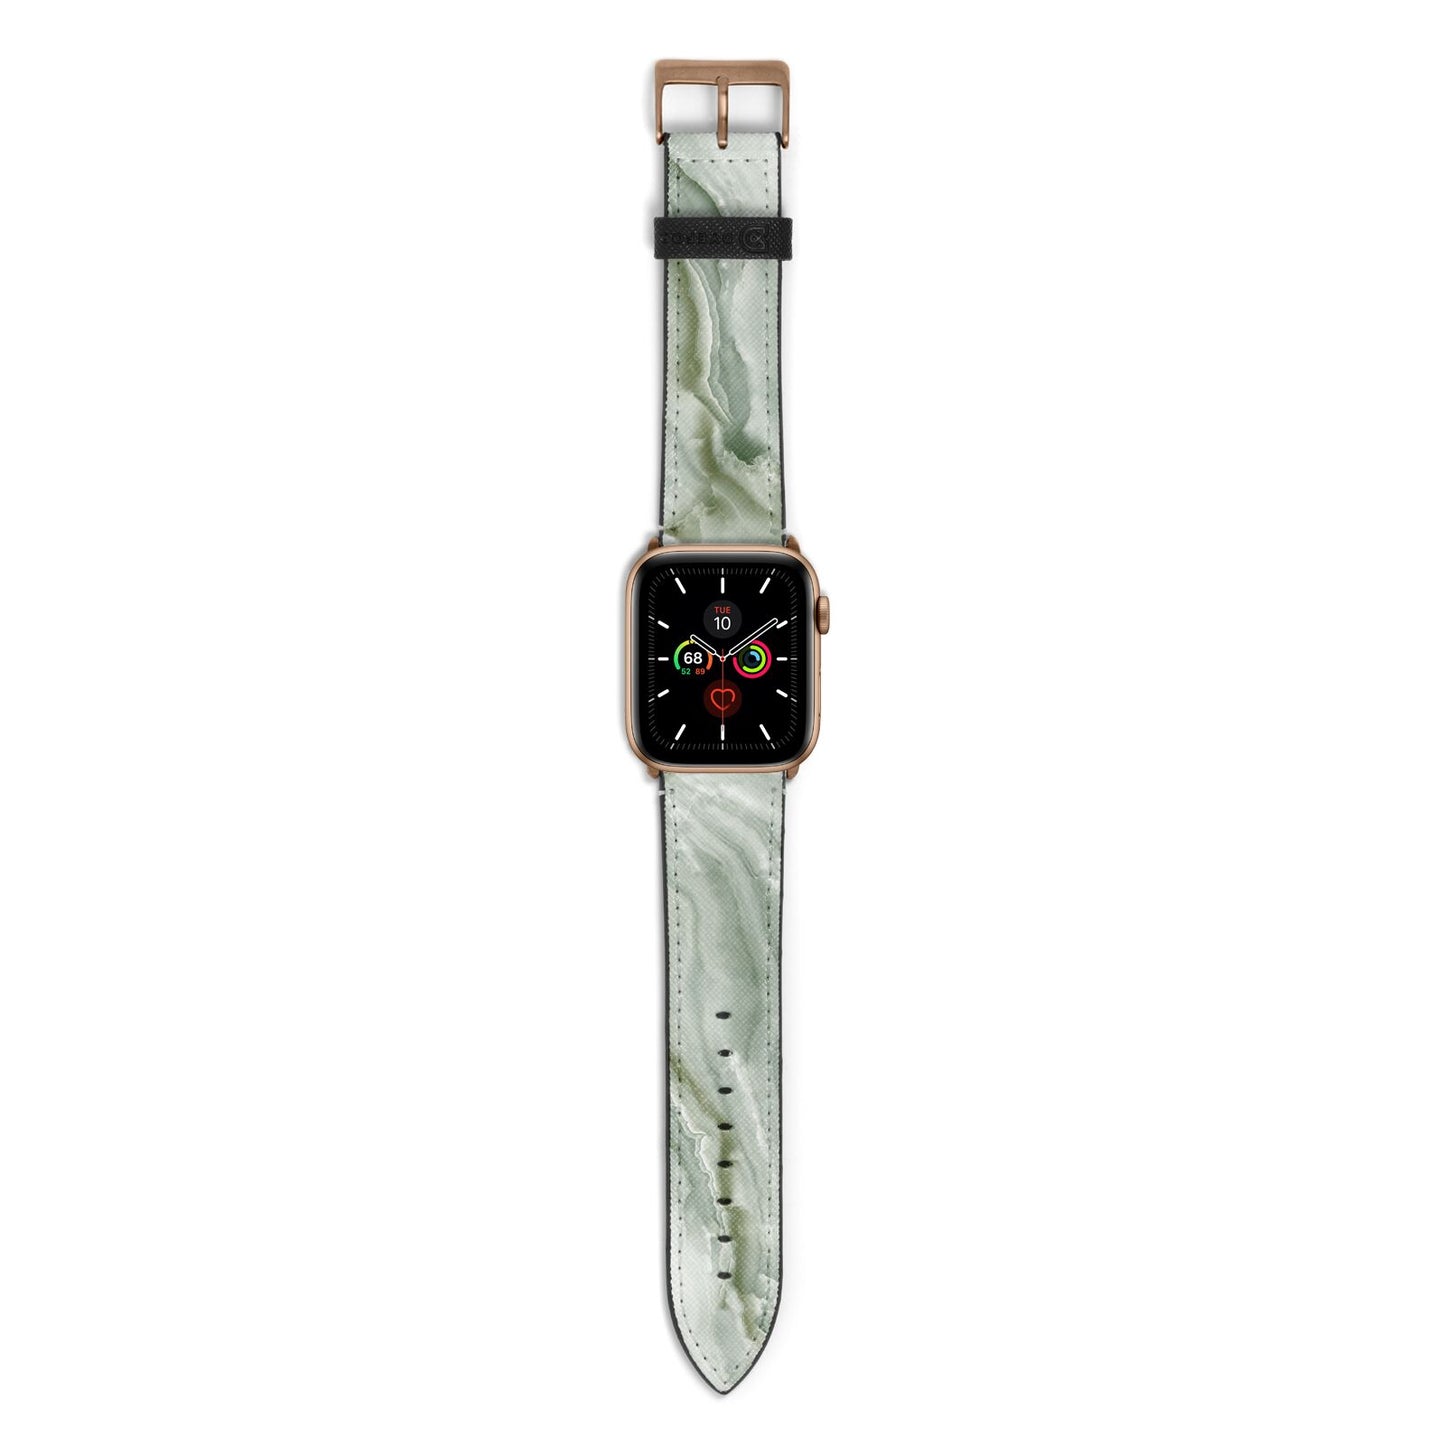 Pistachio Green Marble Apple Watch Strap with Gold Hardware